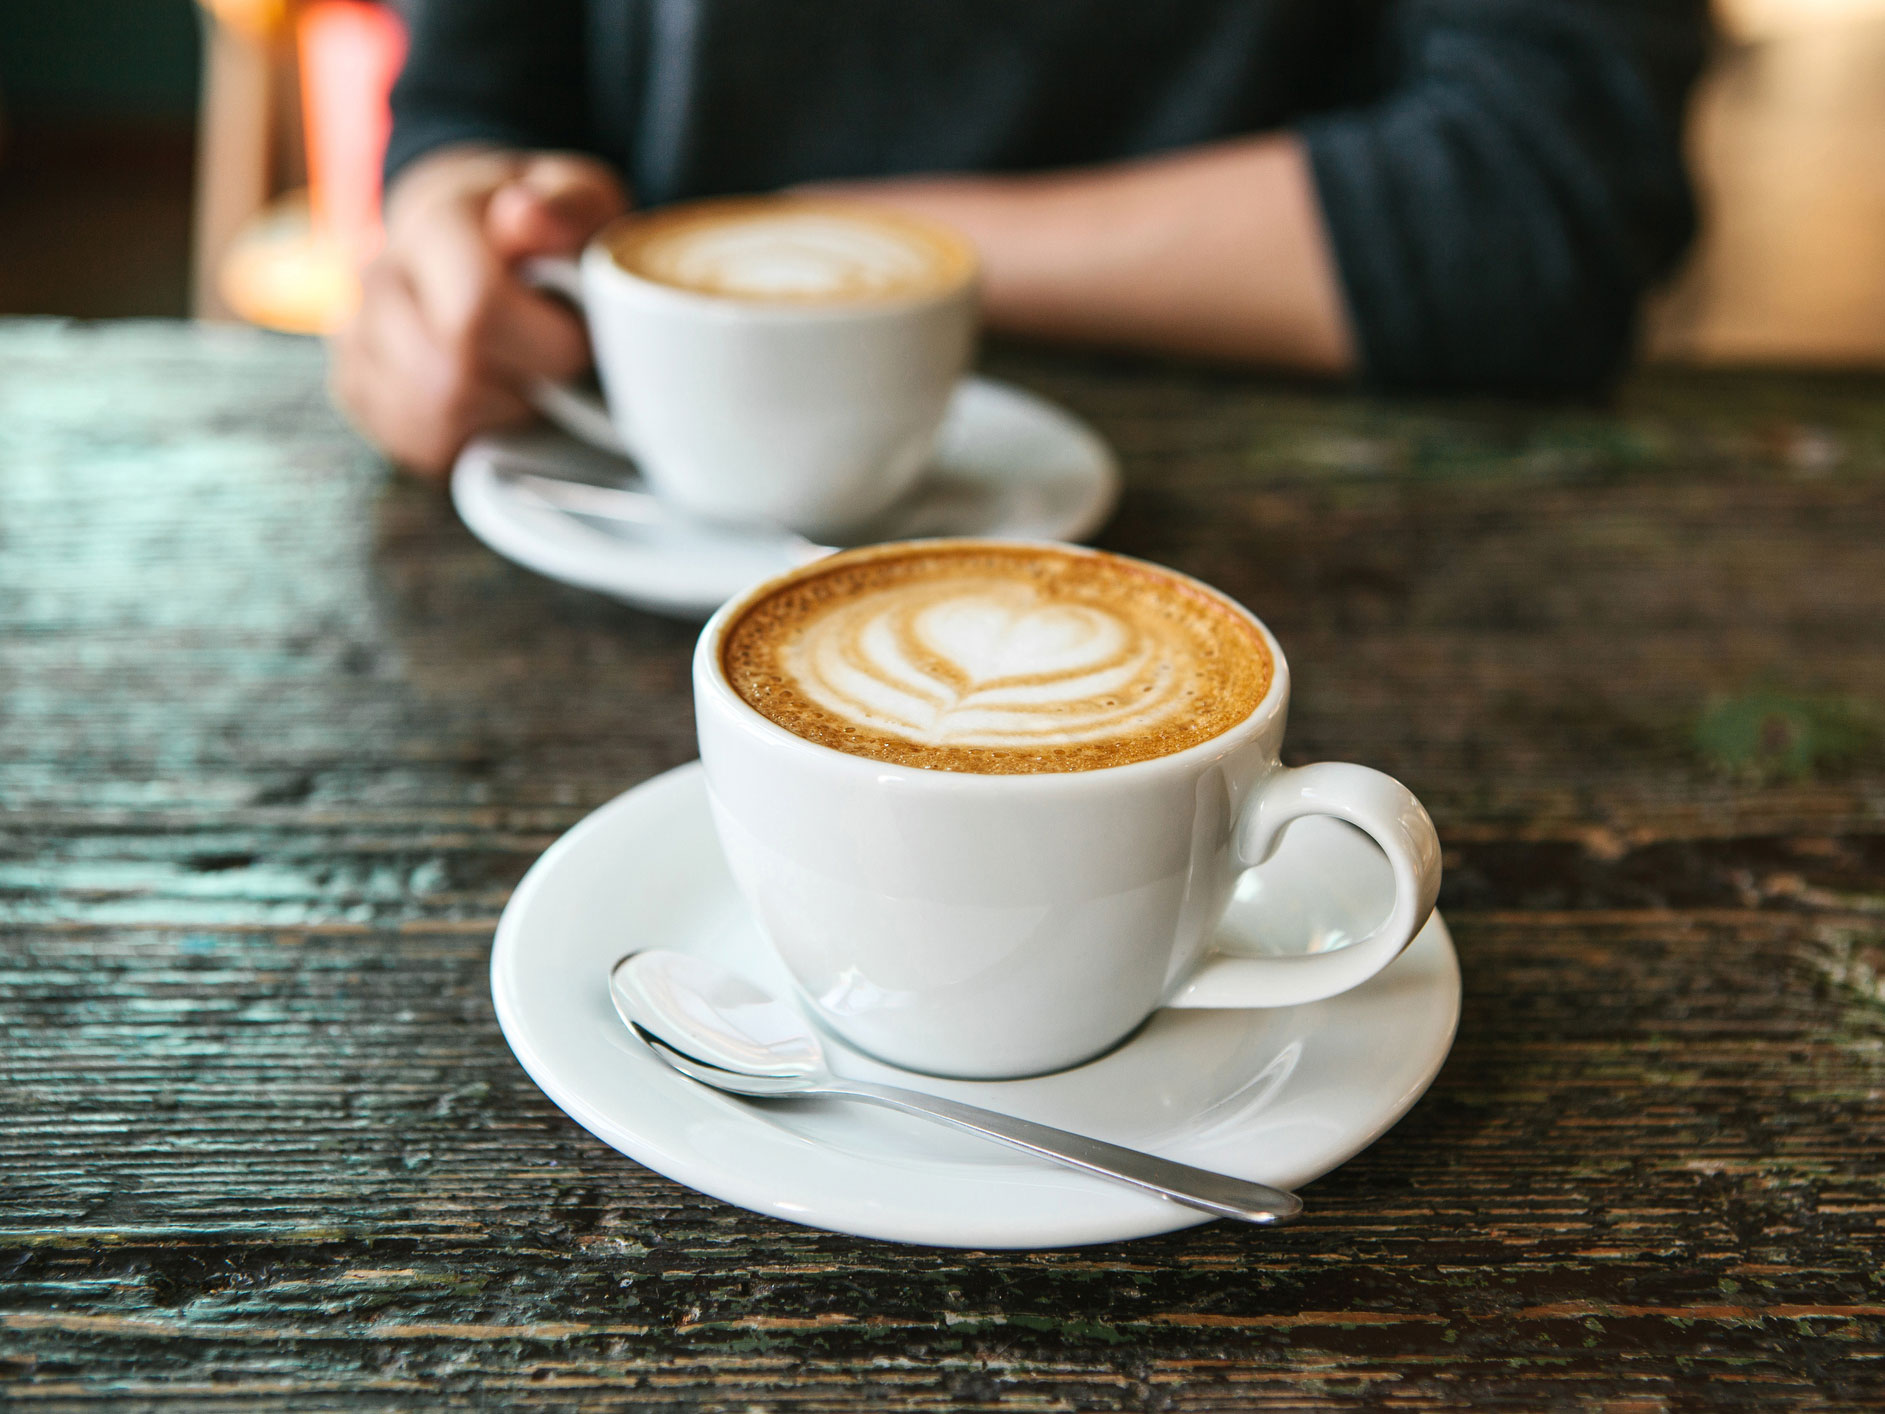 Does coffee fight or fuel your heart disease risk?